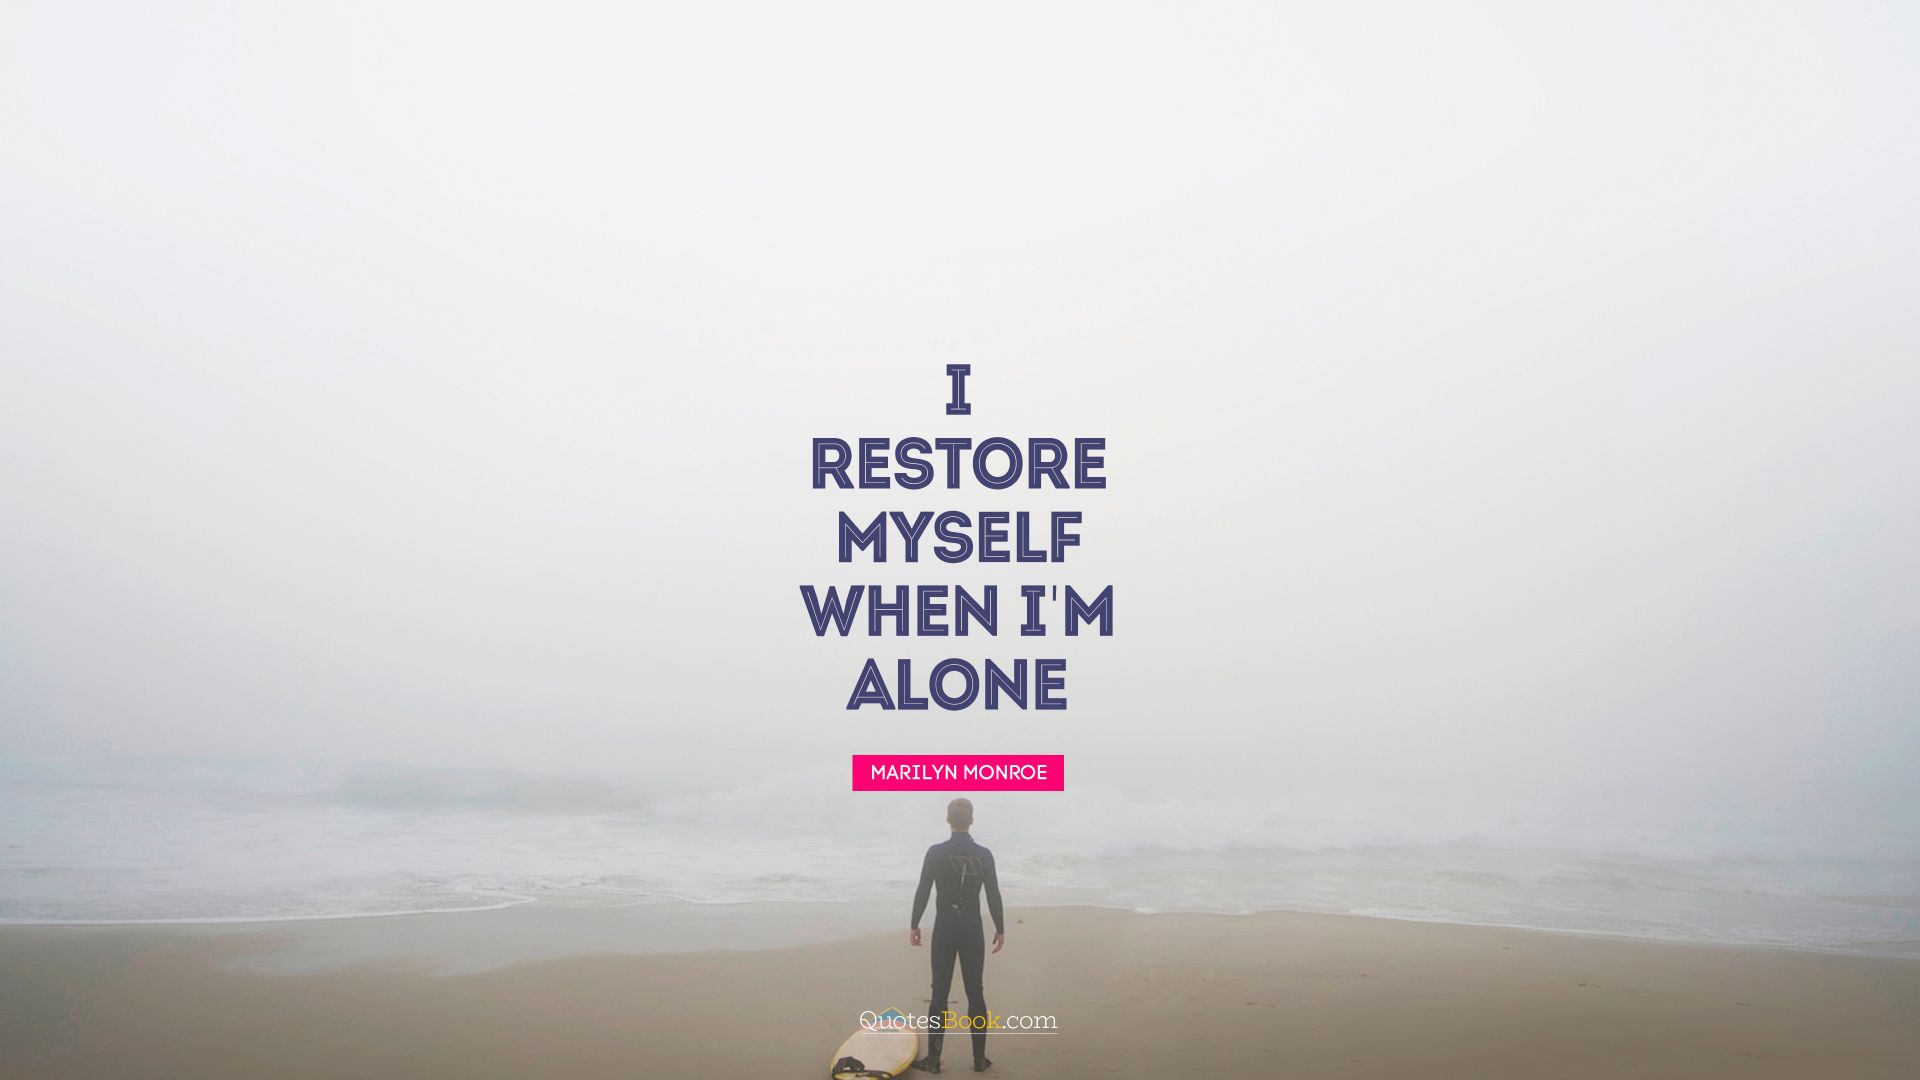 I restore myself when I'm alone. - Quote by Marilyn Monroe